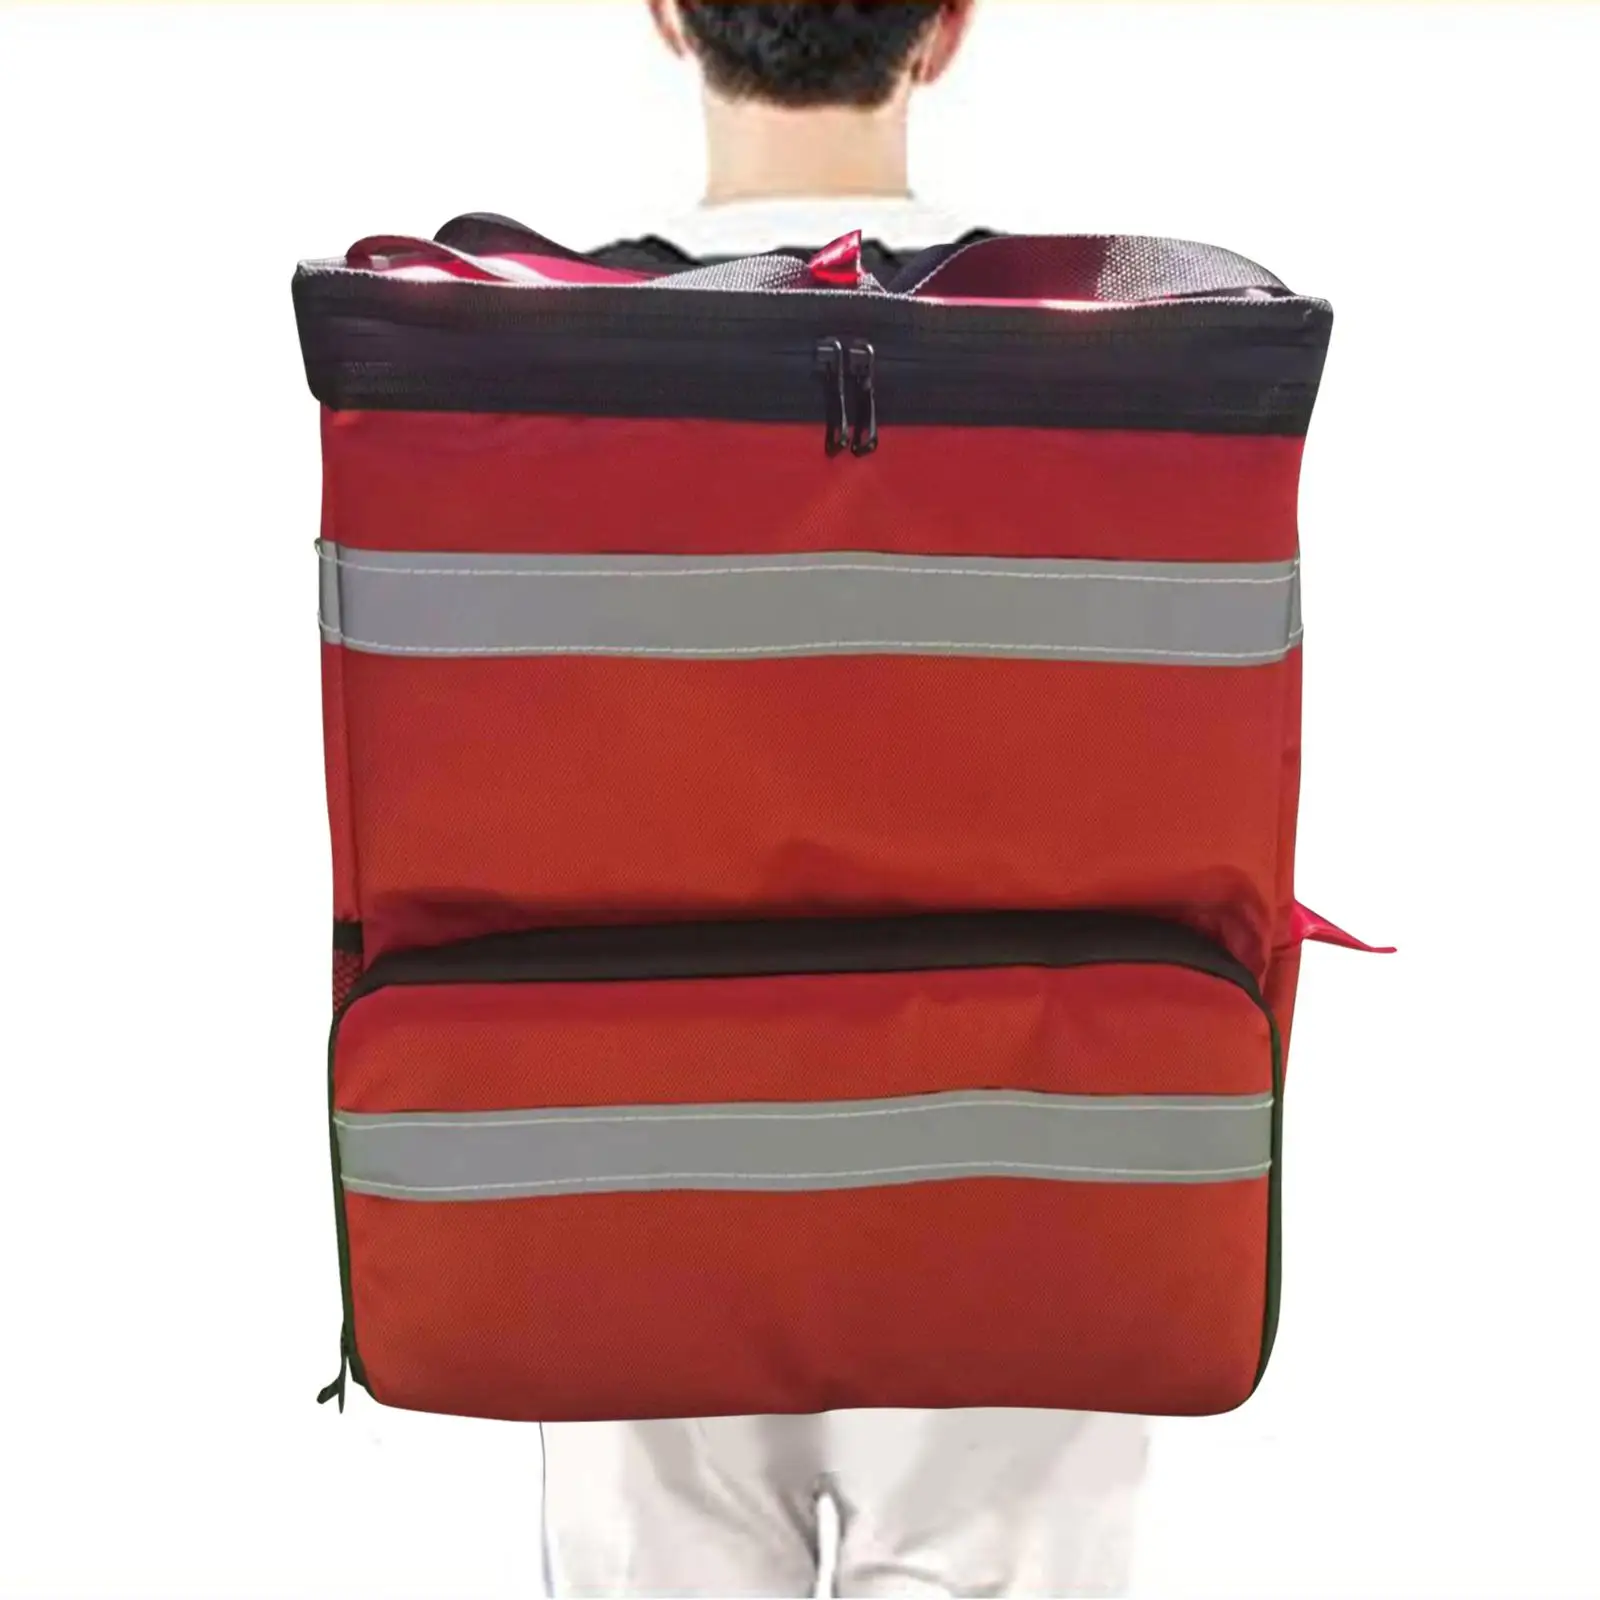 Expandable Catering Delivery Bag Leakproof for Travel Hot or Cold Food Car